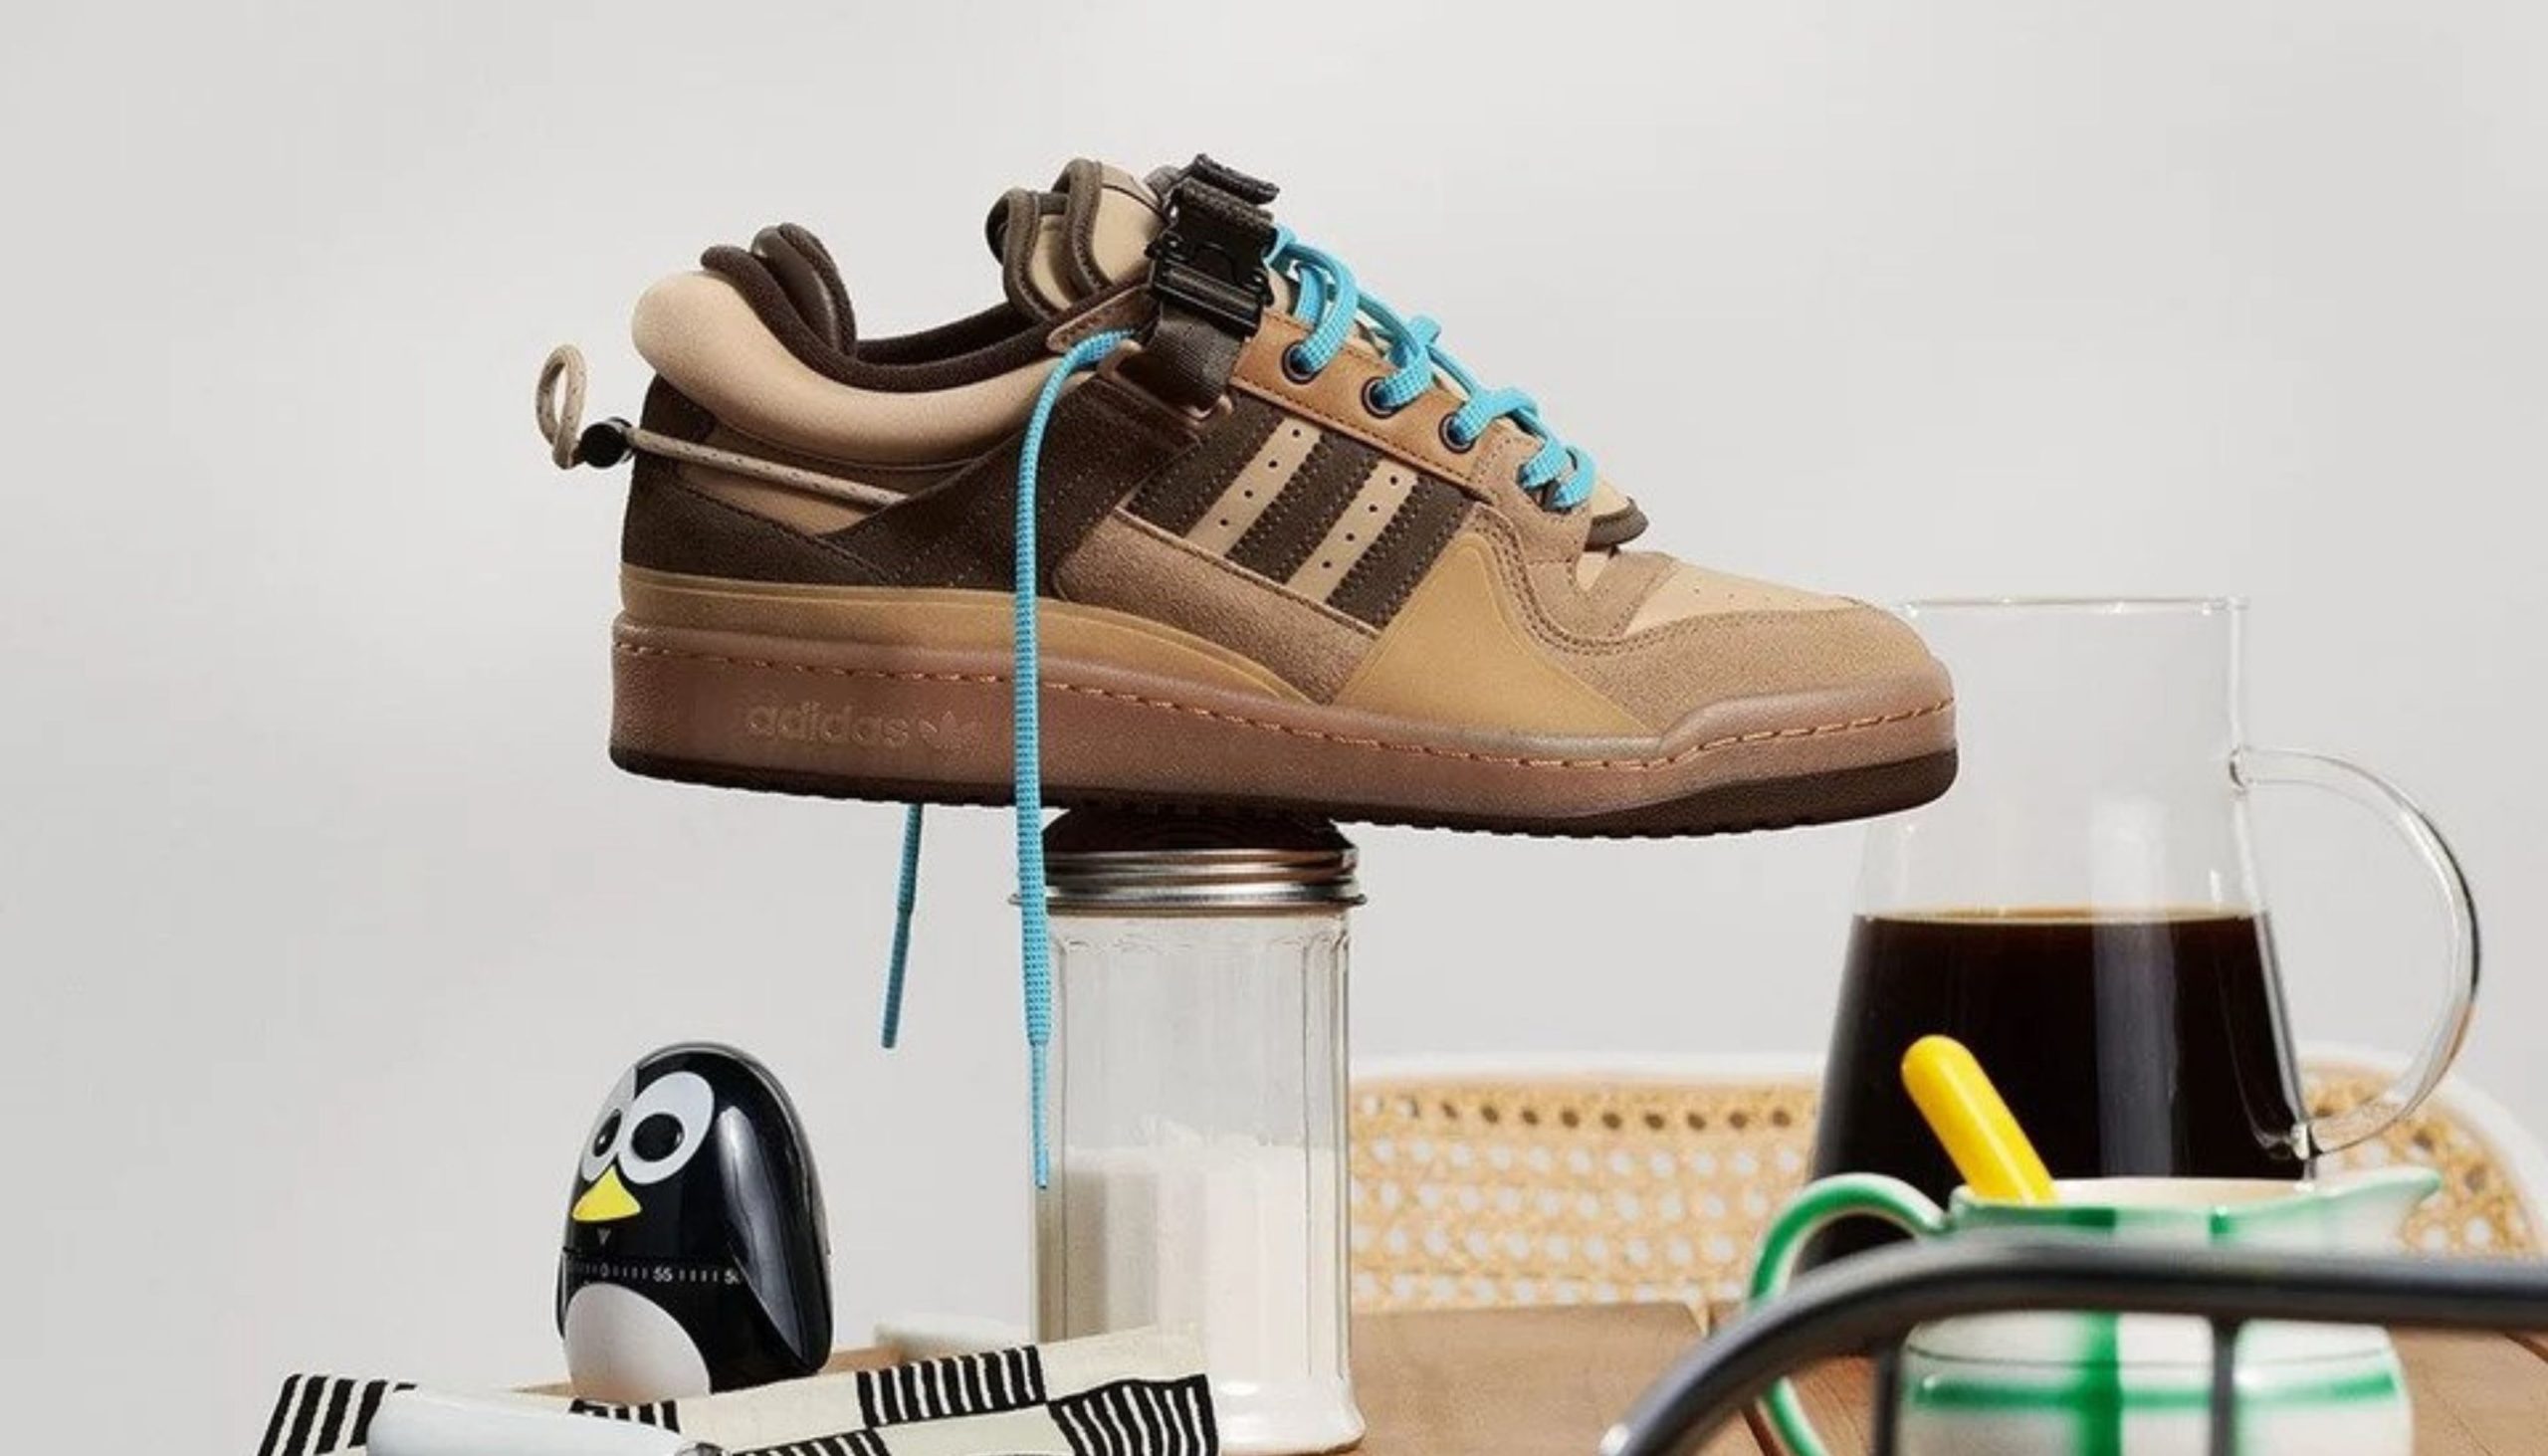 Adidas pull the shots with the Bad Bunny Forum First Cafe Shoes